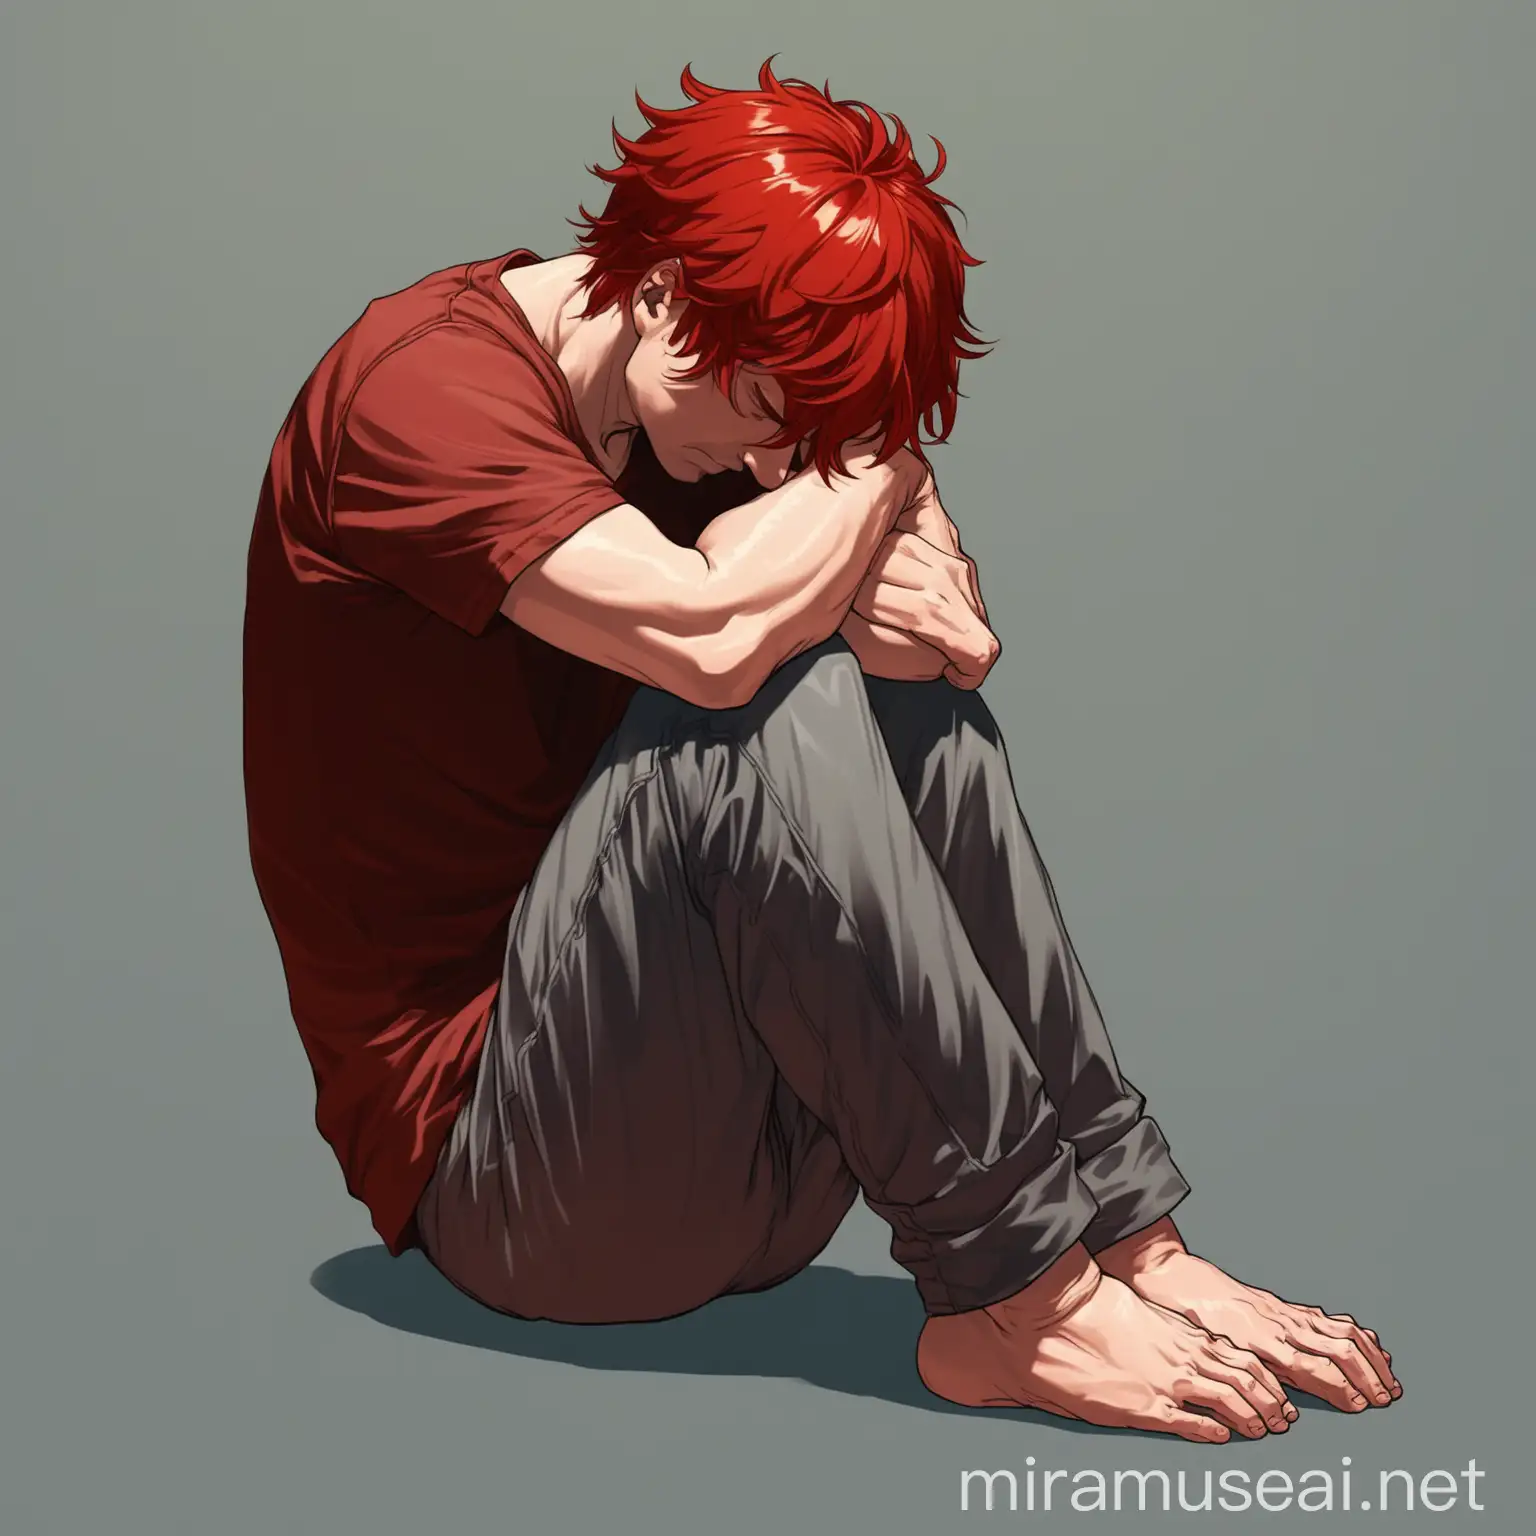 RedHaired Man Contemplating in Fetal Position